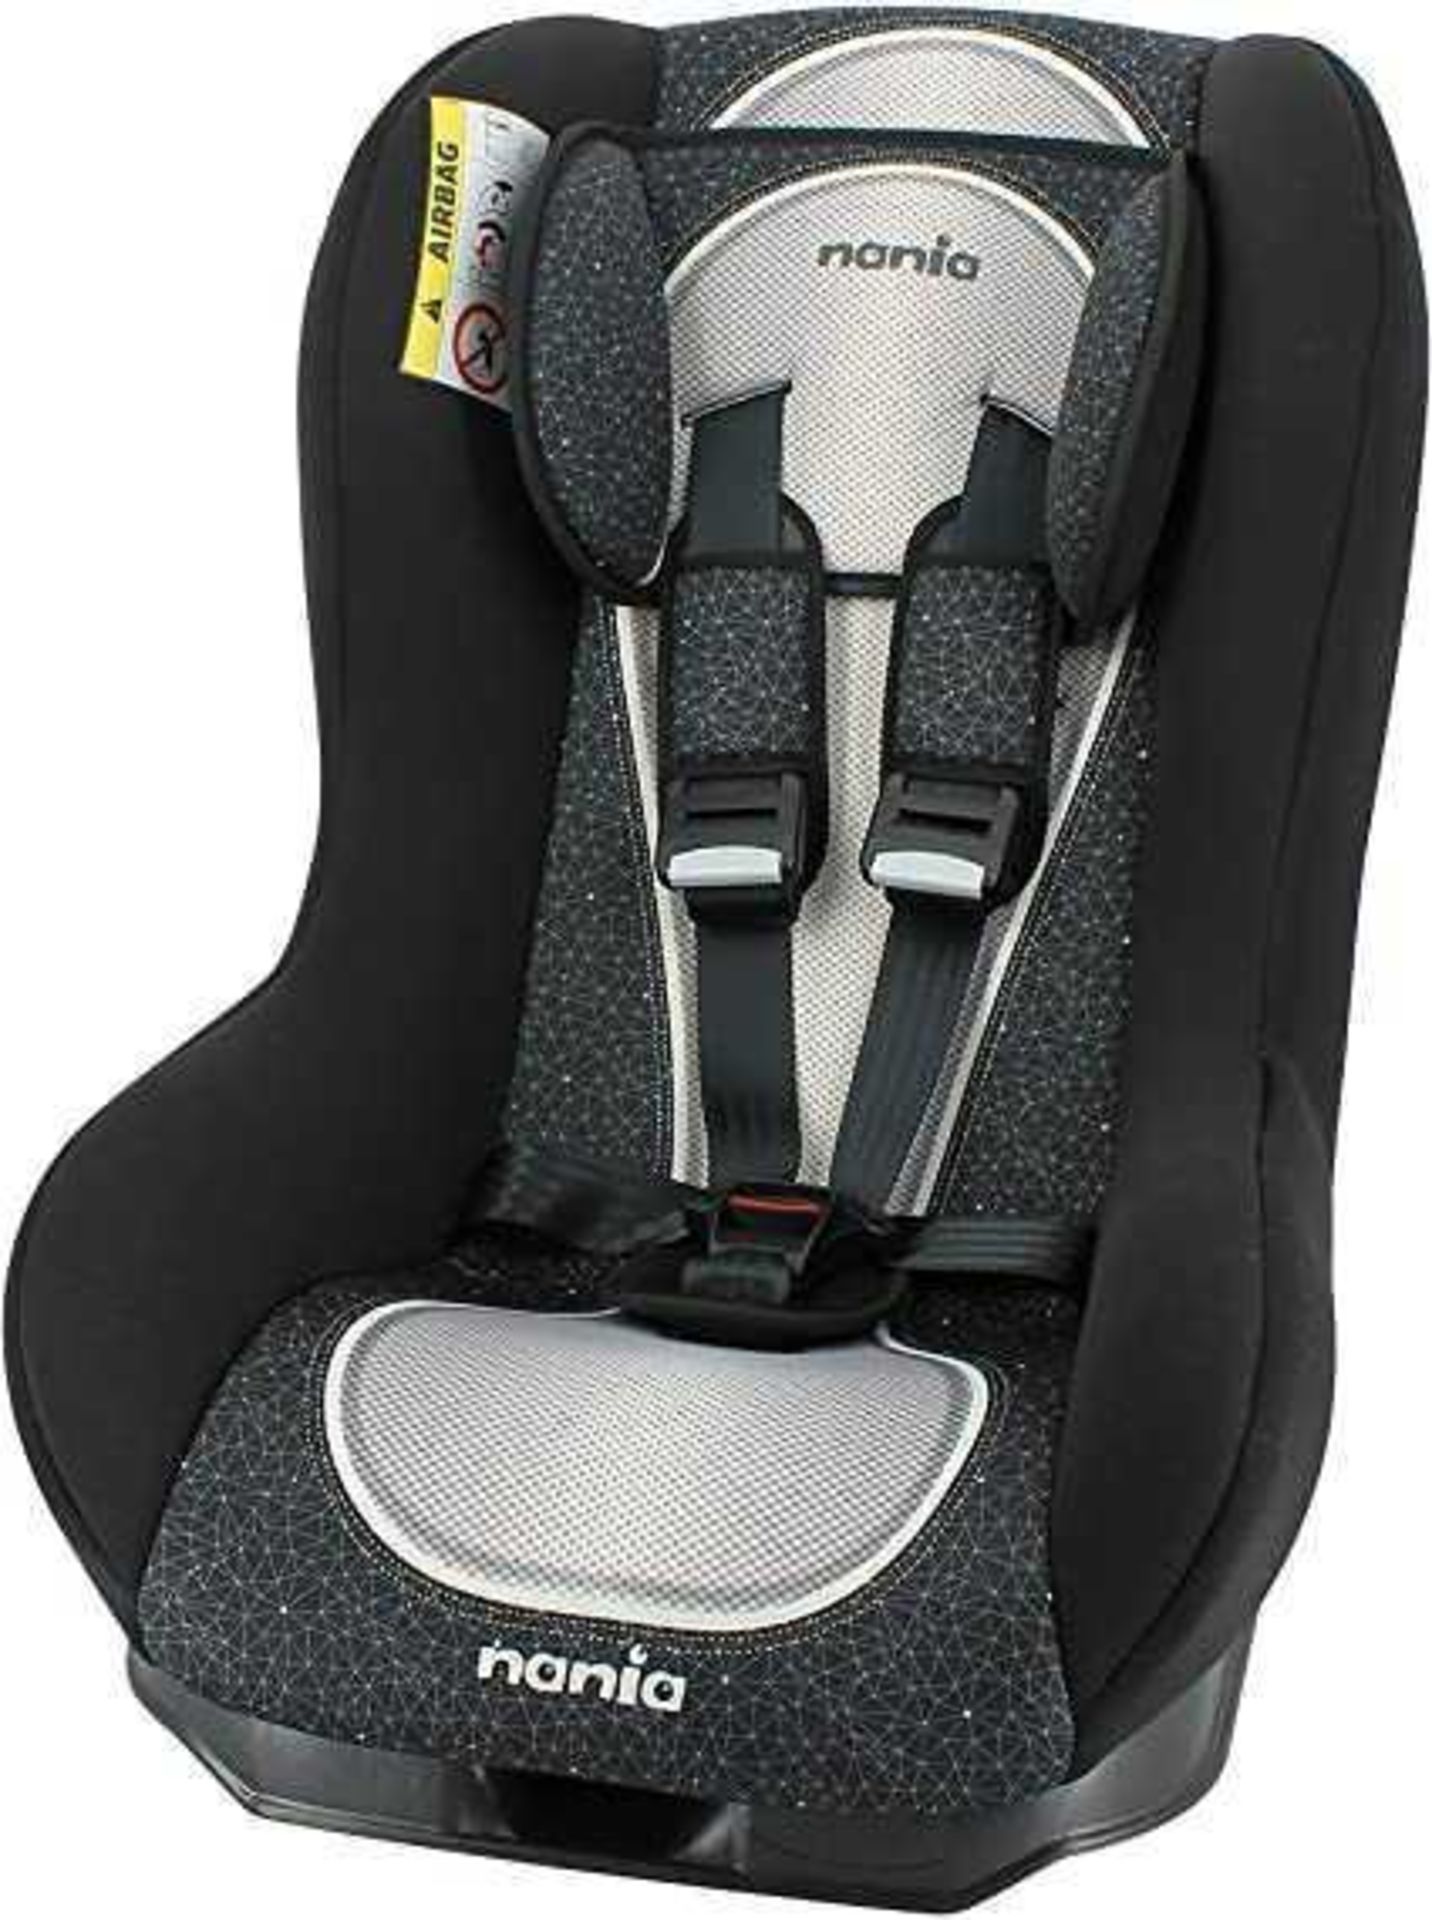 Rrp £75 Nania Children'S In Car Safety Seat